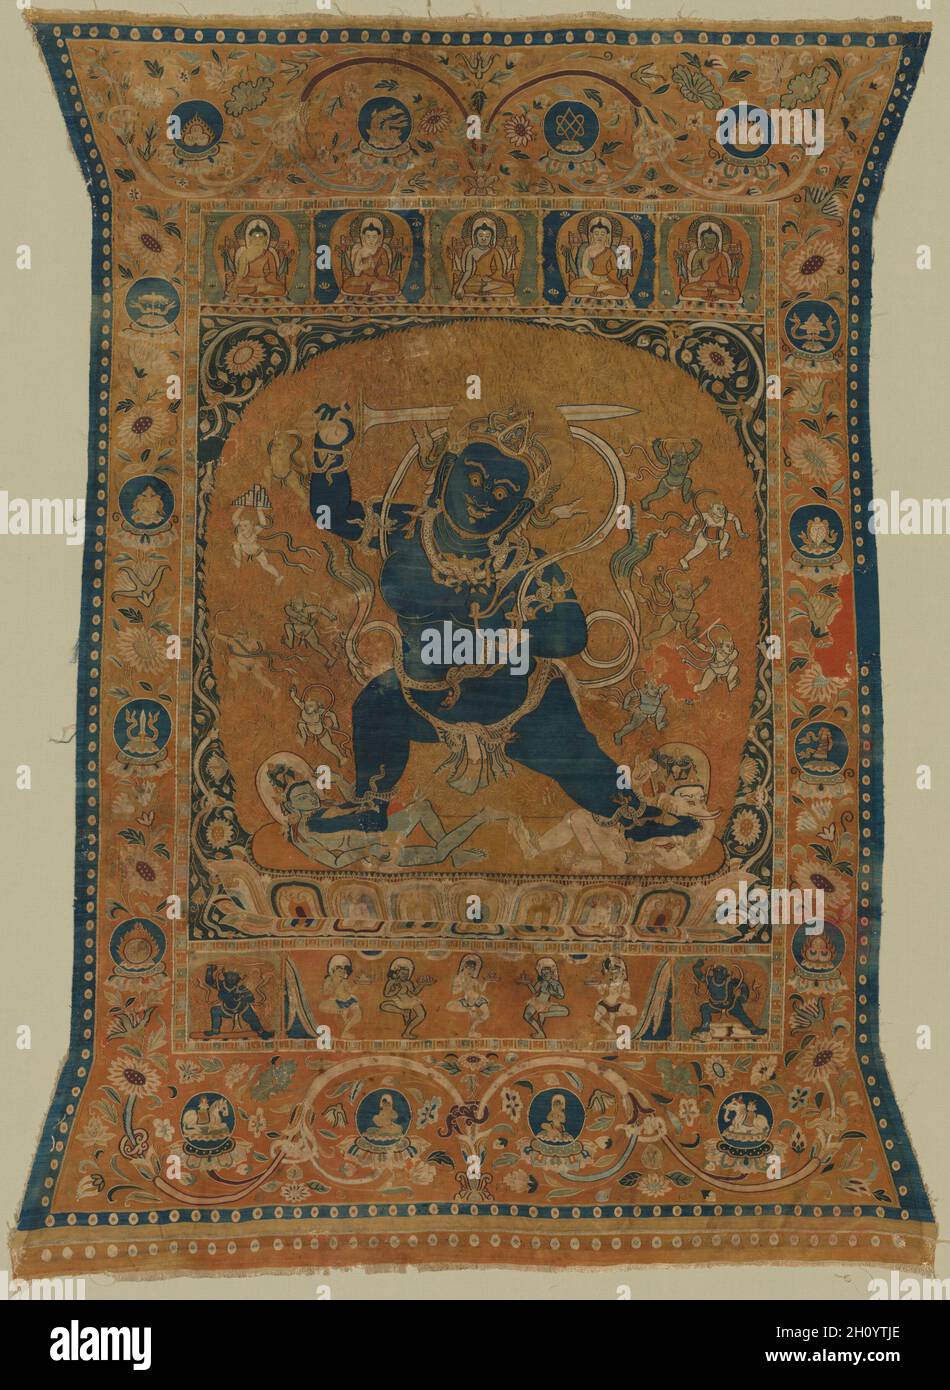 Achala, King of the Wrathful Ones (previously identified as Vighnantaka), early 1200s. Mongolia, Tangut Xia, Khara Khoto (1032-1227), early 13th century. Thangka, silk tapestry; overall: 100.6 x 74.3 cm (39 5/8 x 29 1/4 in.); mounted: 111.1 x 83.8 x 7 cm (43 3/4 x 33 x 2 3/4 in.).  Close ties between the Buddhists of the Central Asian Tangut Xia kingdom and Tibetan monasteries resulted in works of devotional art, such as this tangka, featuring a remover of obstacles. The imagery has its roots in Nepal, where Vighnantaka was summoned by a powerful practitioner to defeat the Hindu god Ganesha, w Stock Photo